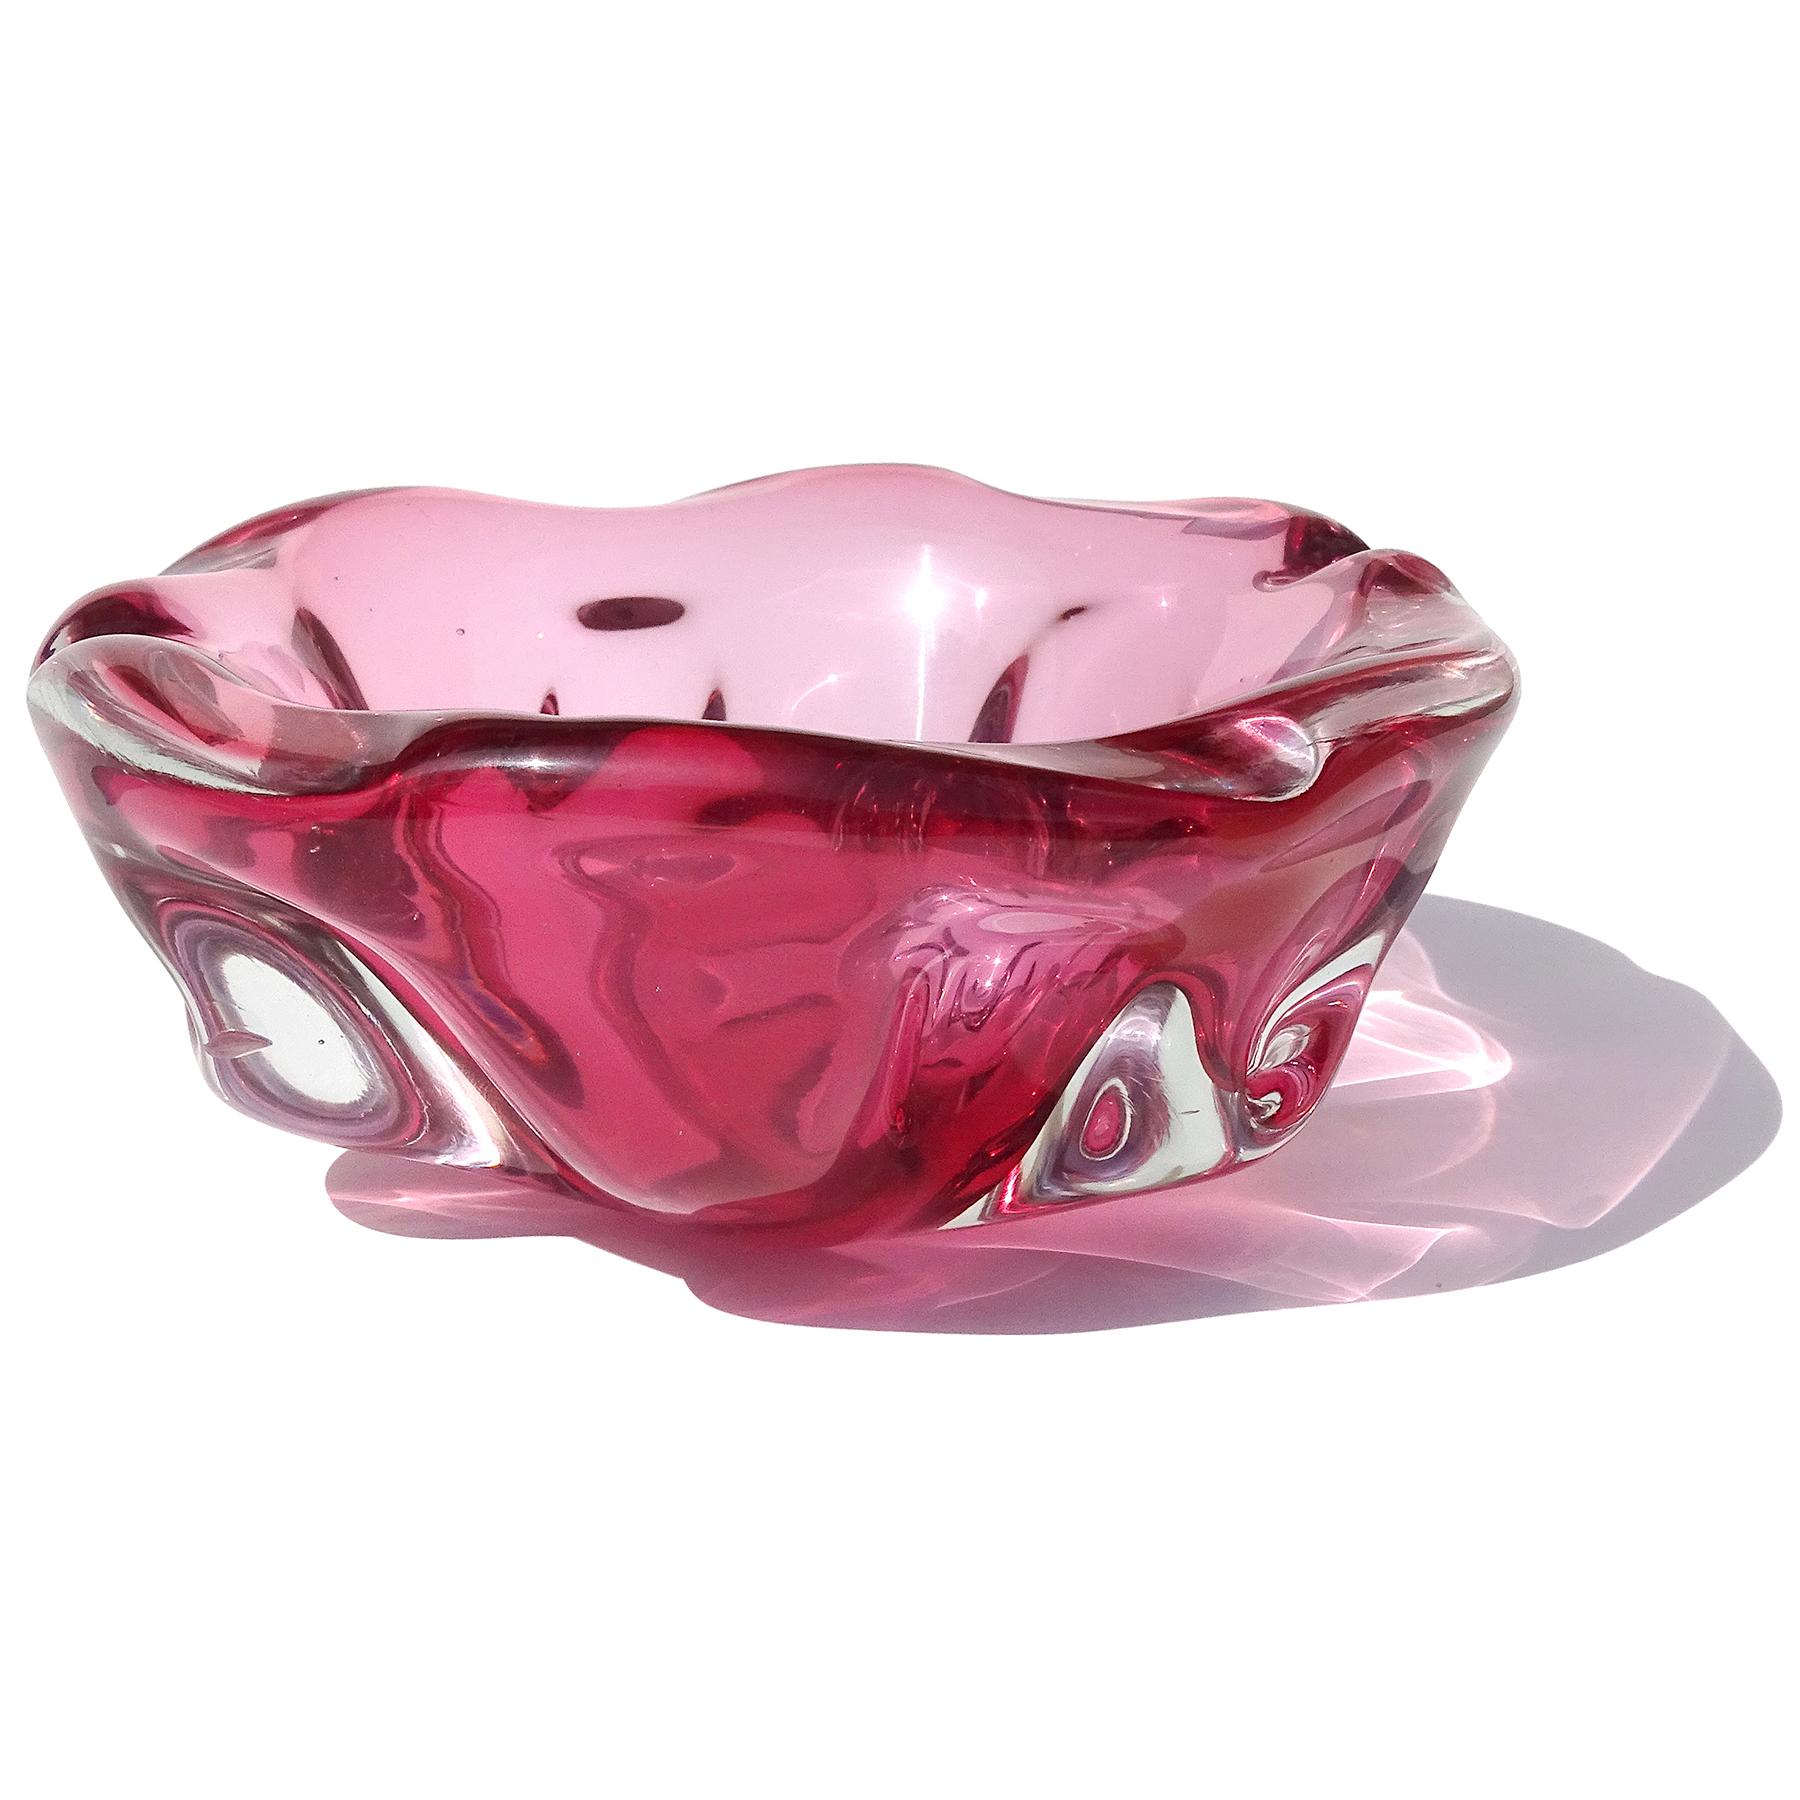 Beautiful vintage Murano hand blown Sommerso pink Italian art glass sculptural decorative bowl / ashtray. Documented to designer Alfredo Barbini, circa 1950-1960. Published in his catalog. The bowl has an original 